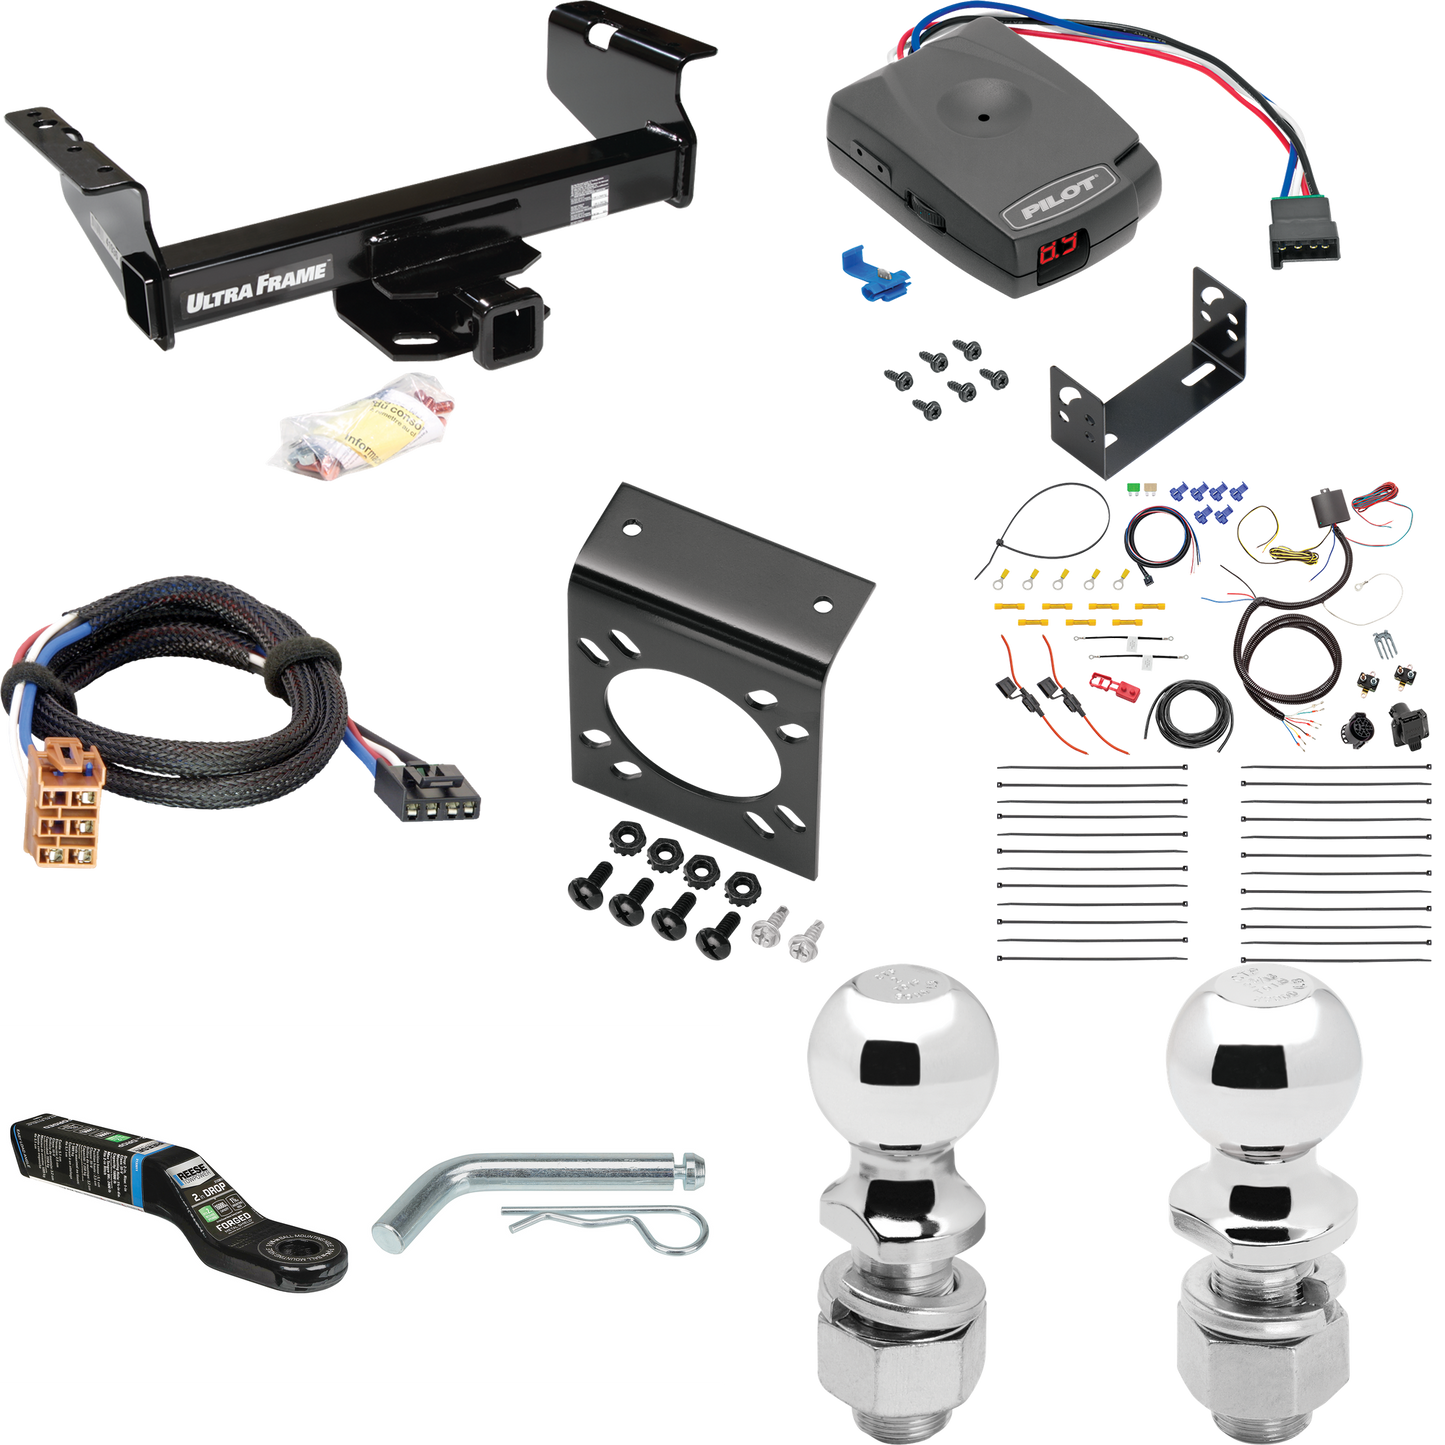 Fits 2001-2002 Chevrolet Silverado 3500 Trailer Hitch Tow PKG w/ Pro Series Pilot Brake Control + Plug & Play BC Adapter + 7-Way RV Wiring + 2" & 2-5/16" Ball & Drop Mount (For (Classic), Cab & Chassis, w/34" Wide Frames Models) By Draw-Tite